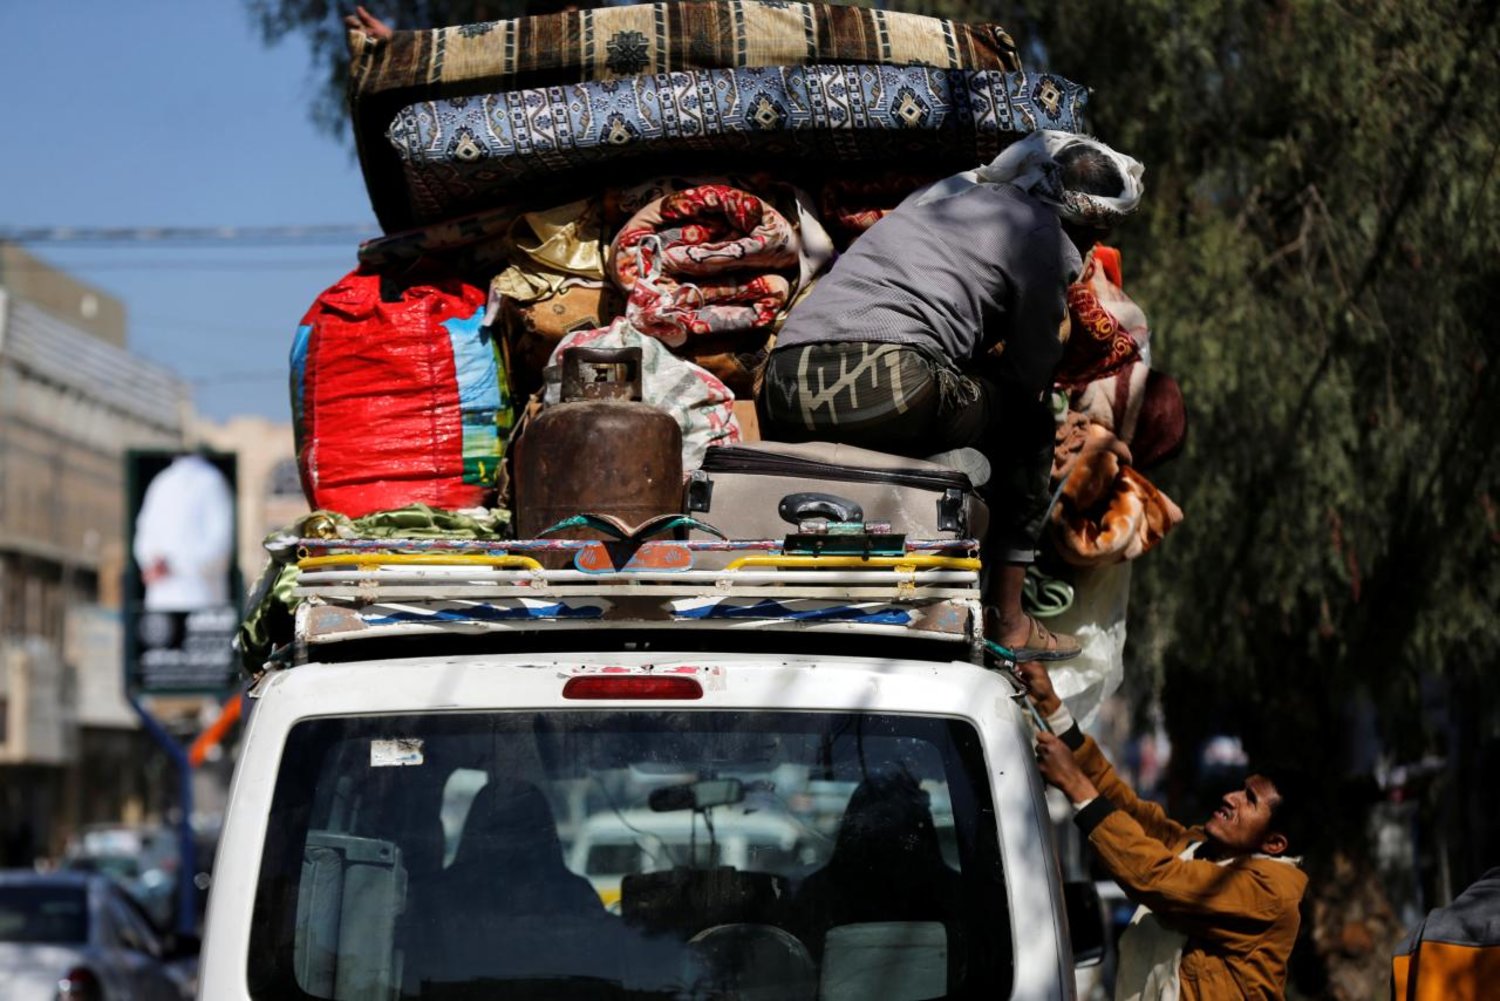 People load belongings on a van as they evacuate their house located on a street where Houthis have recently clashed with forces loyal to slain Yemeni former president Ali Abdullah Saleh in Sana'a, Yemen December 6, 2017. REUTERS/Khaled Abdullah